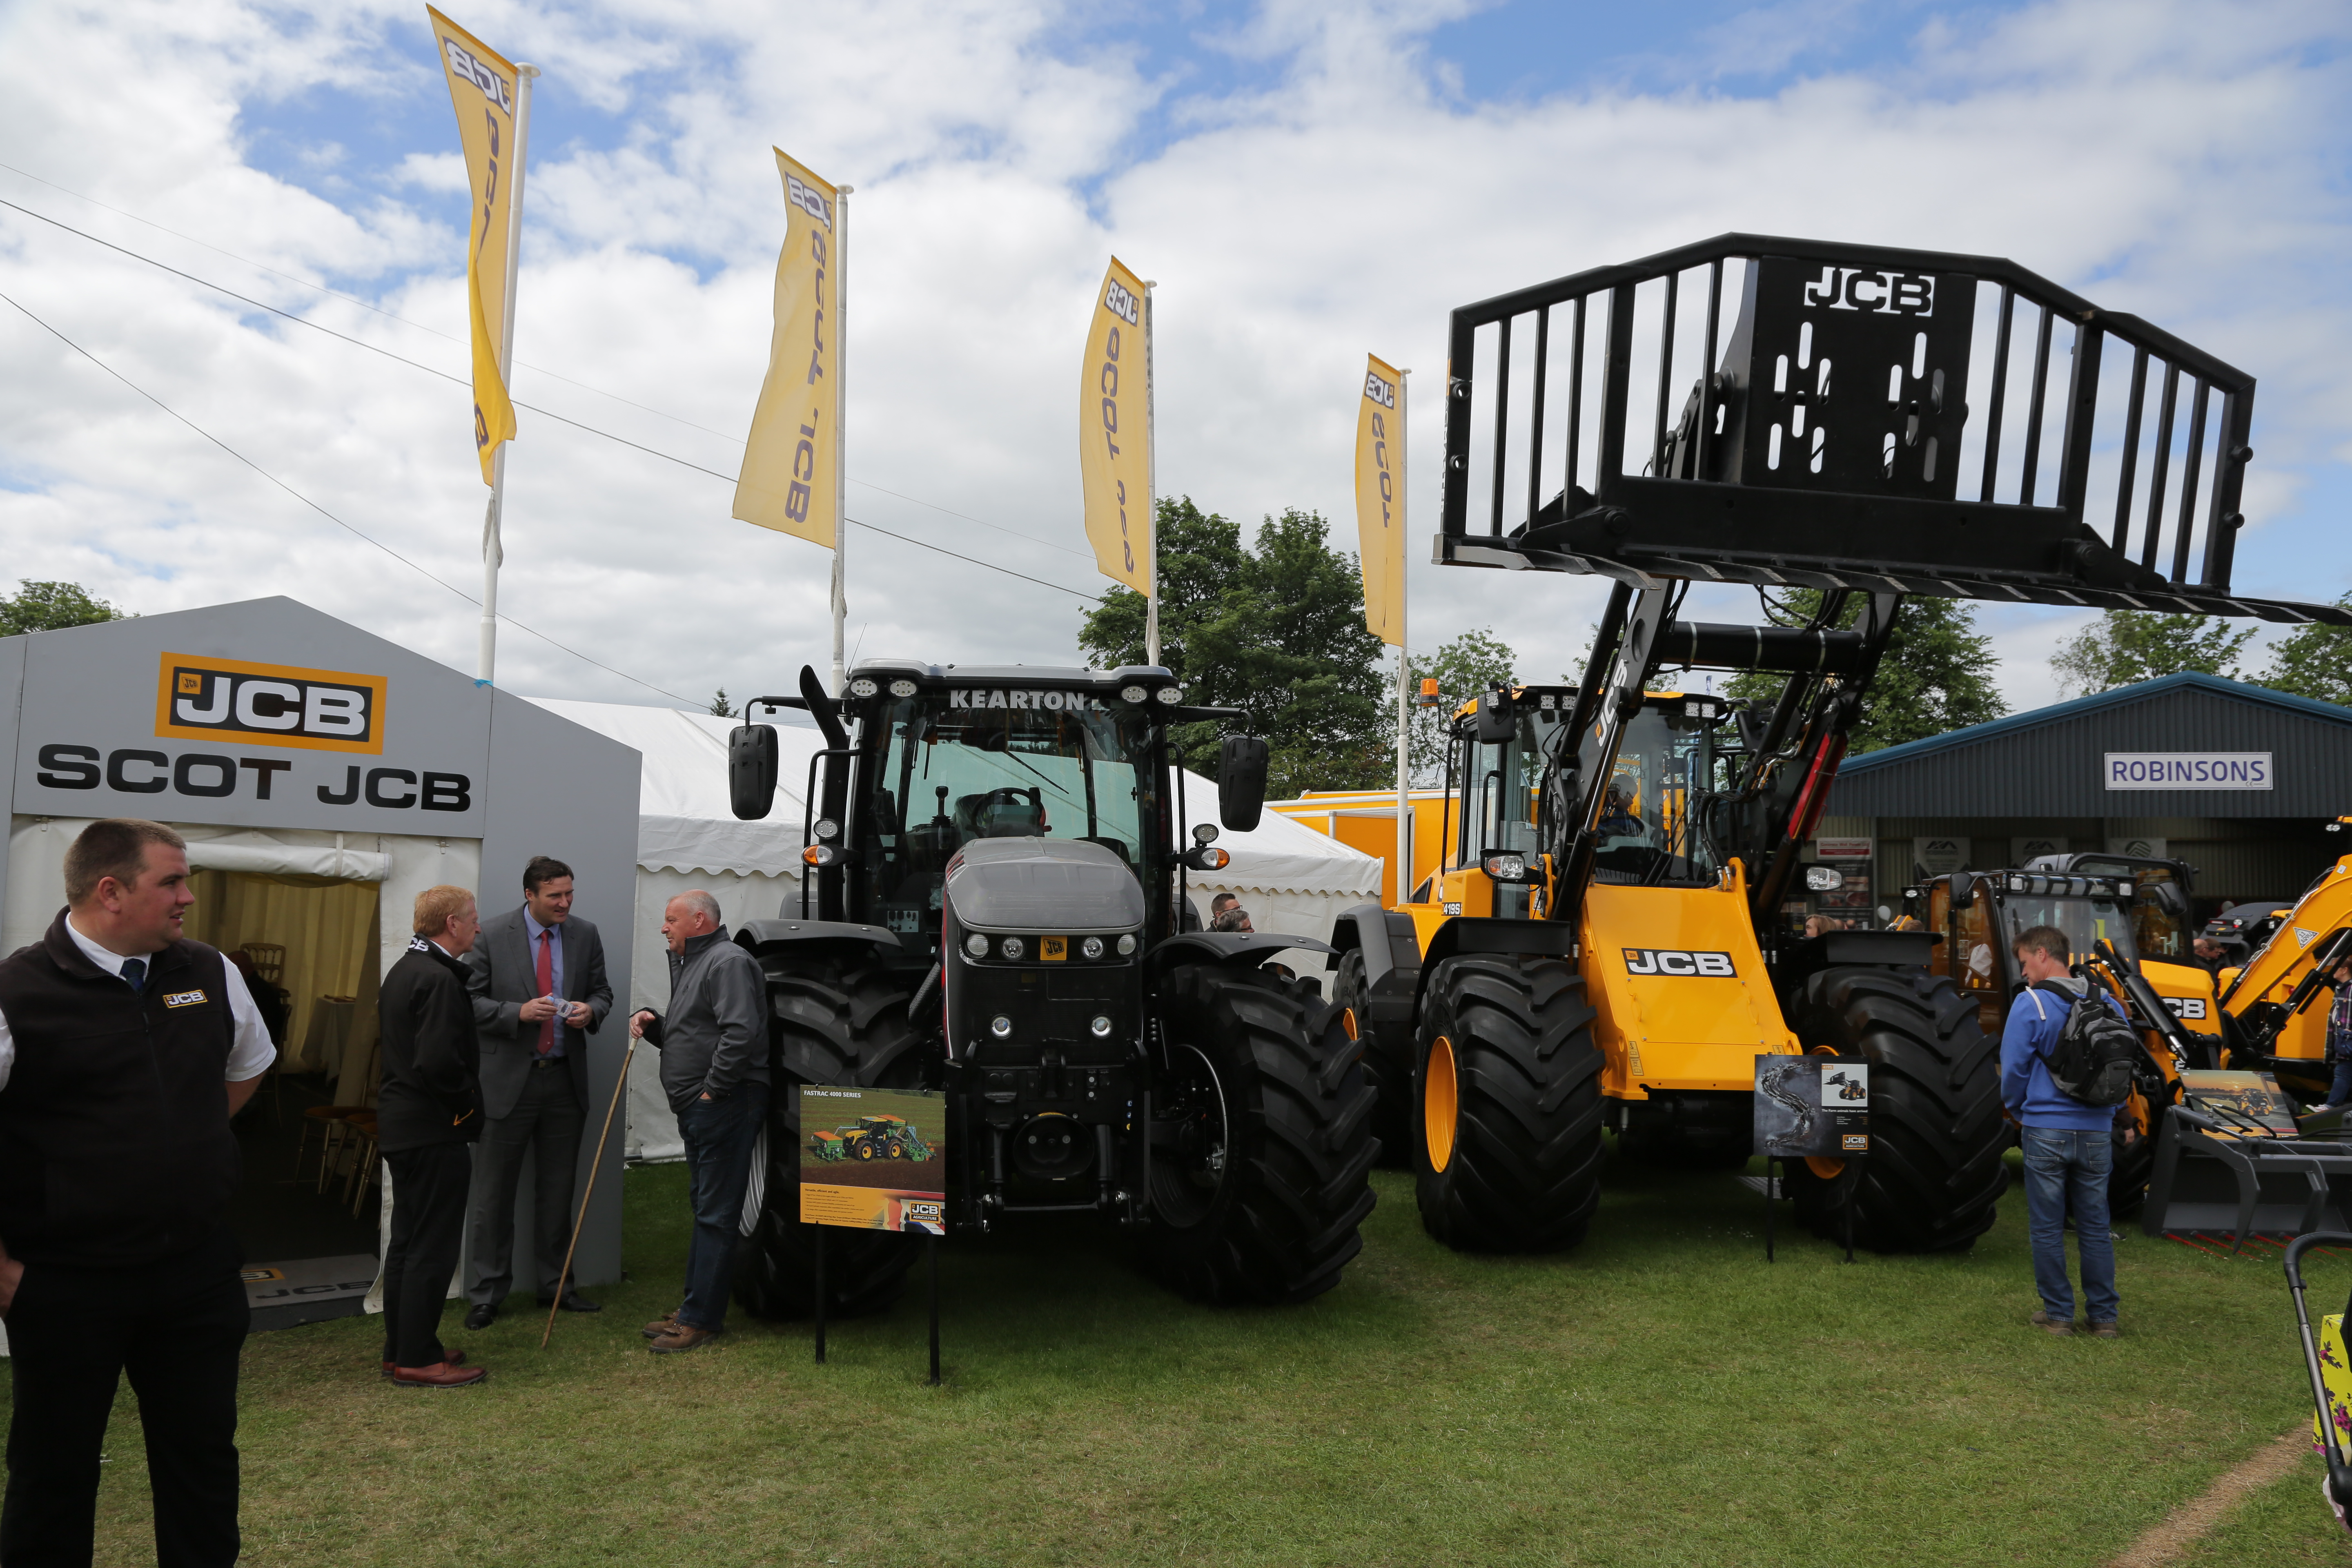 A look back at show season for Scot JCB